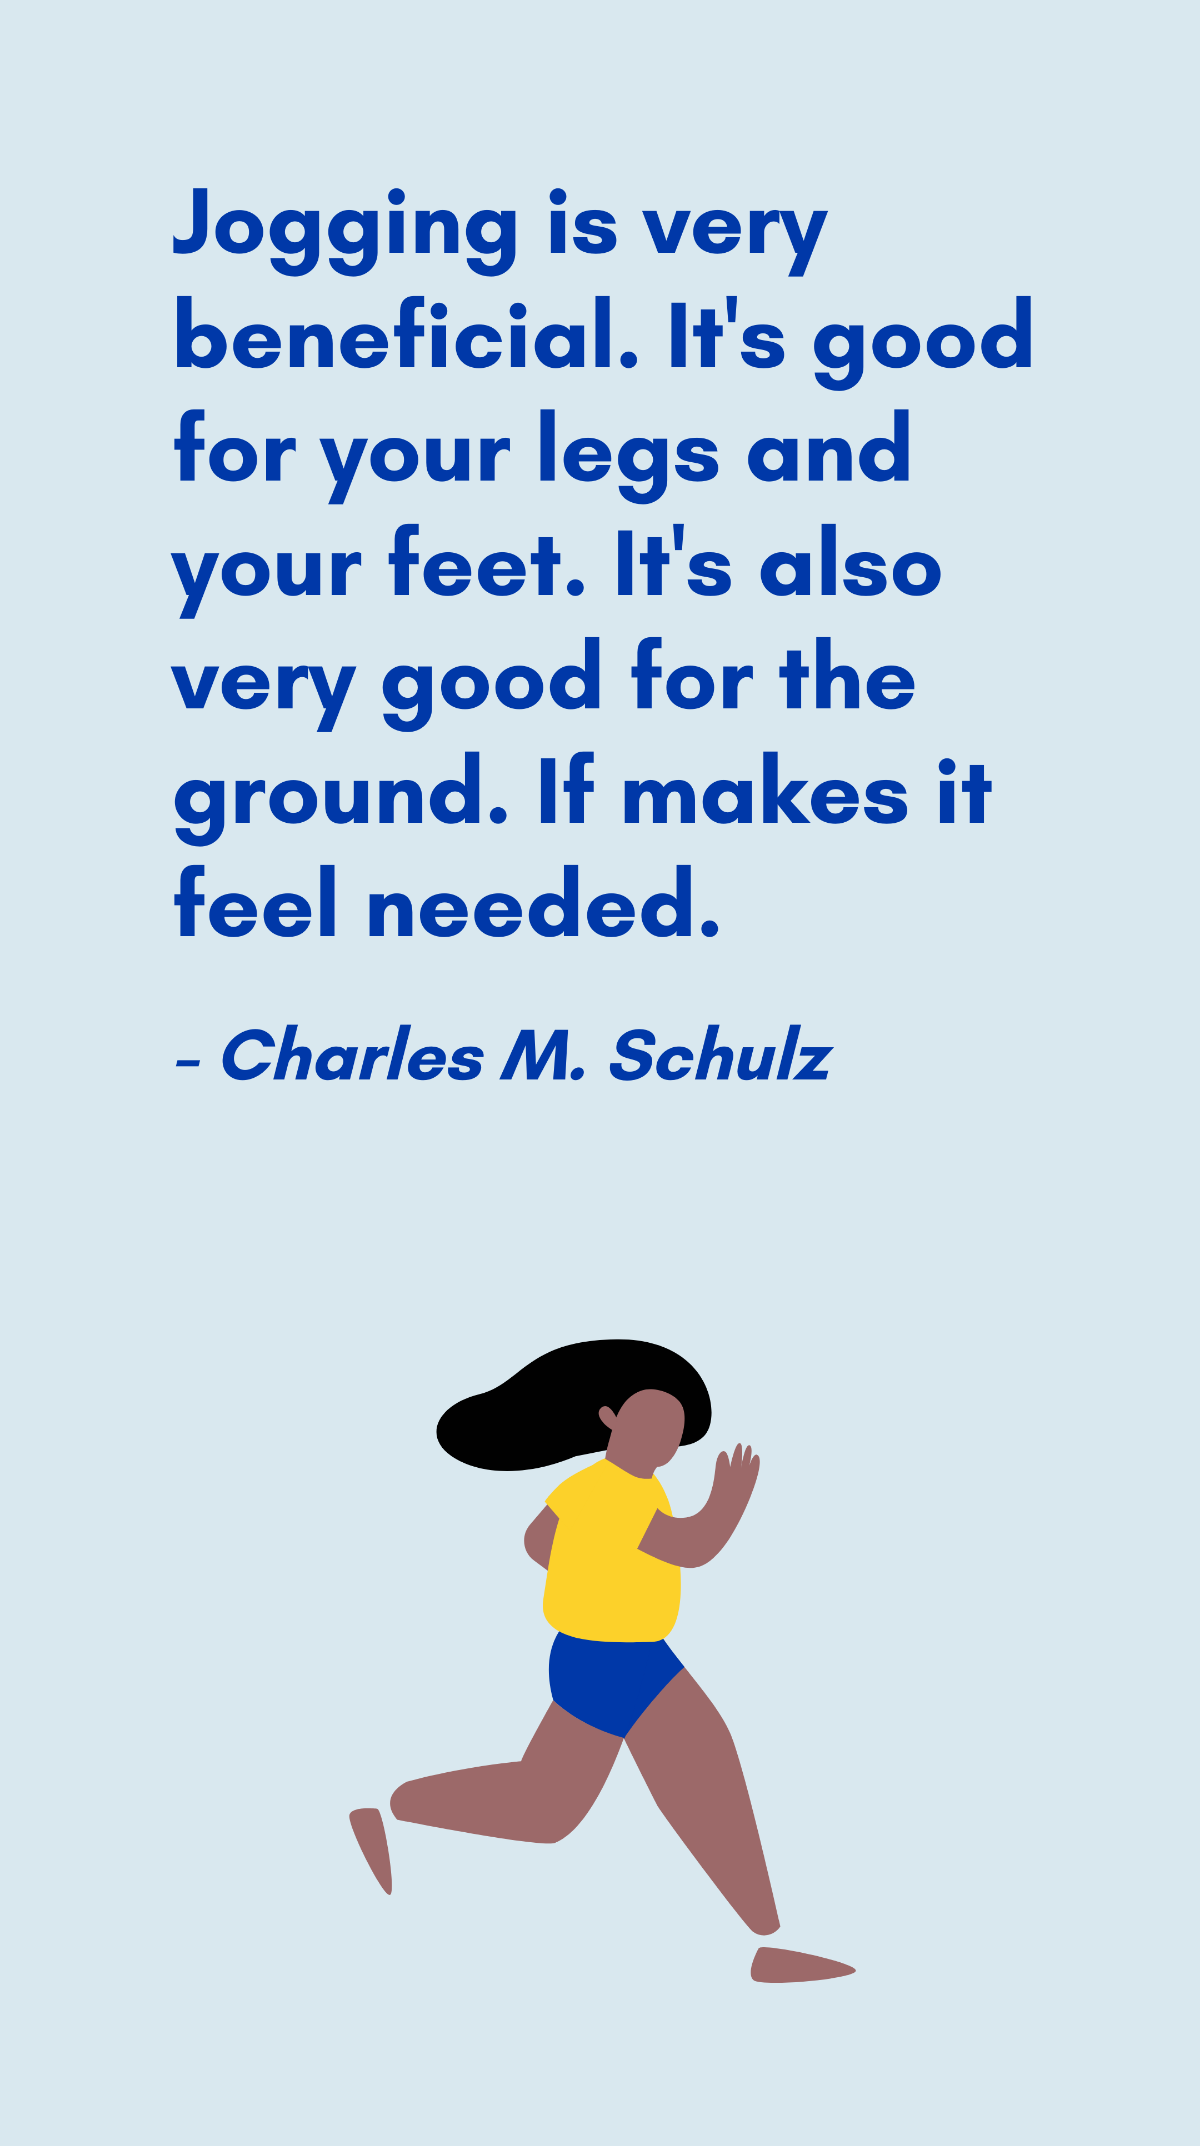 Charles M. Schulz - Jogging is very beneficial. It's good for your legs and your feet. It's also very good for the ground. If makes it feel needed. Template